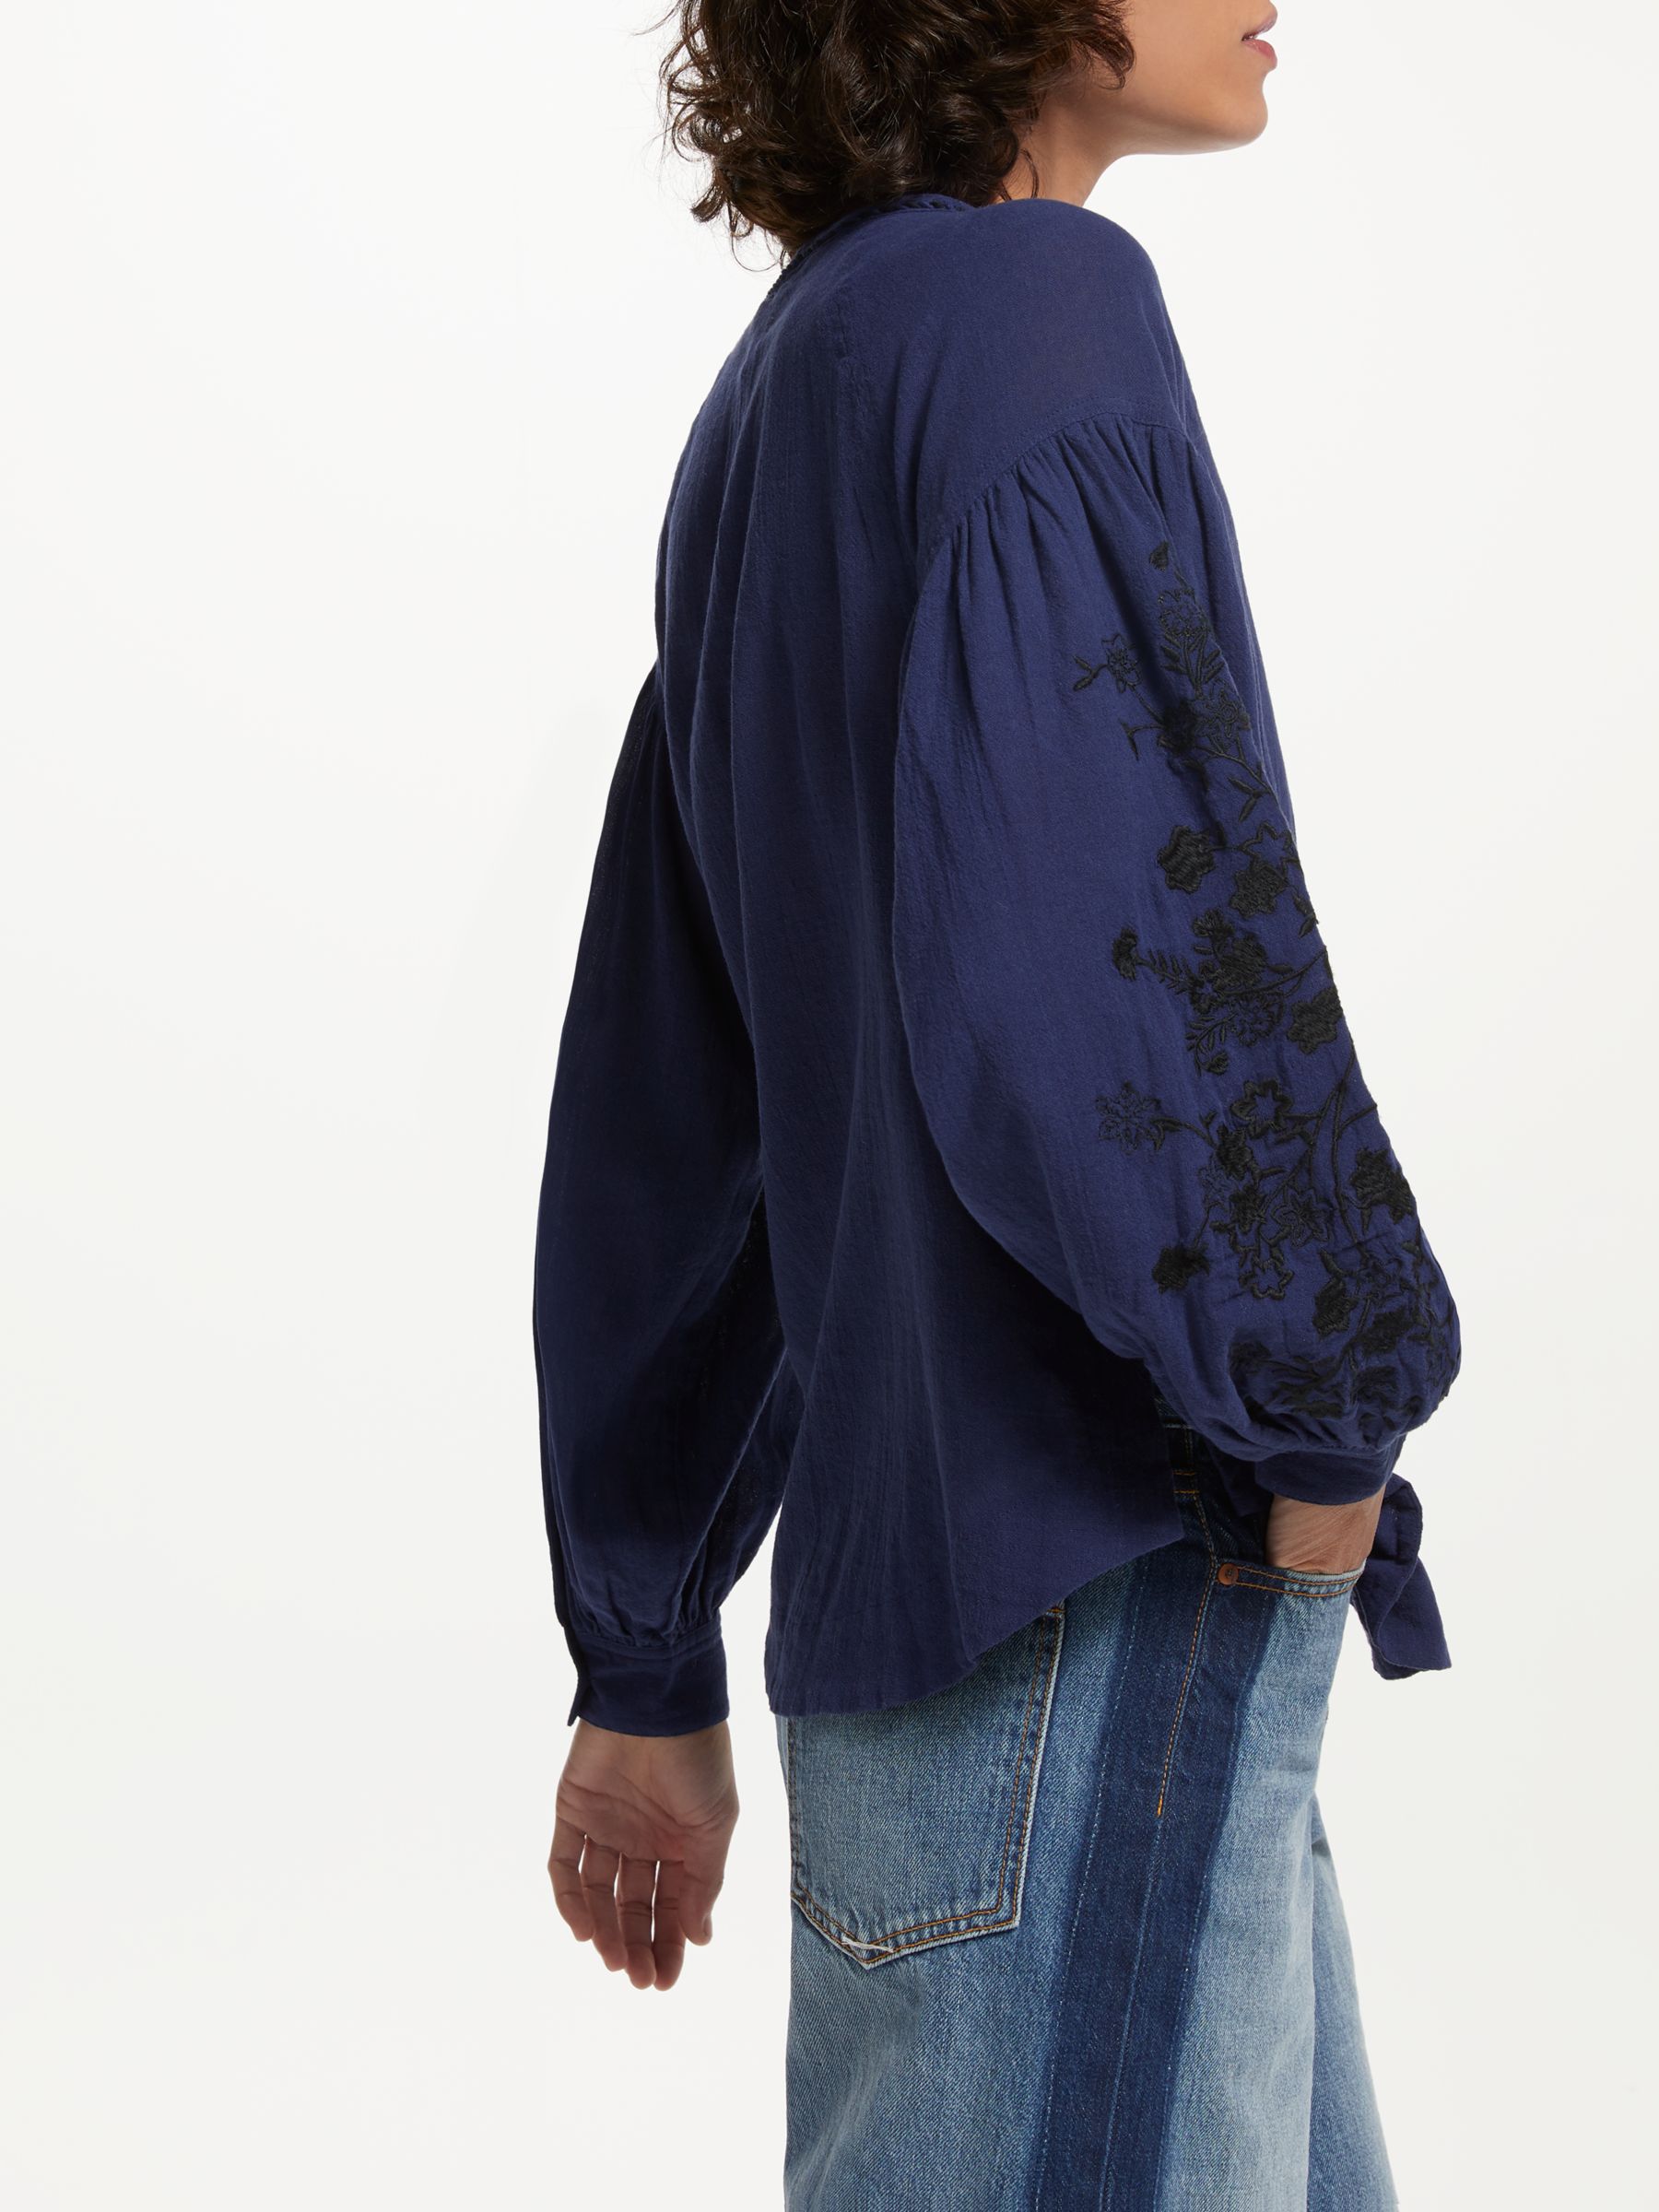 AND/OR Embroidered Blouson Sleeve Blouse, Blue